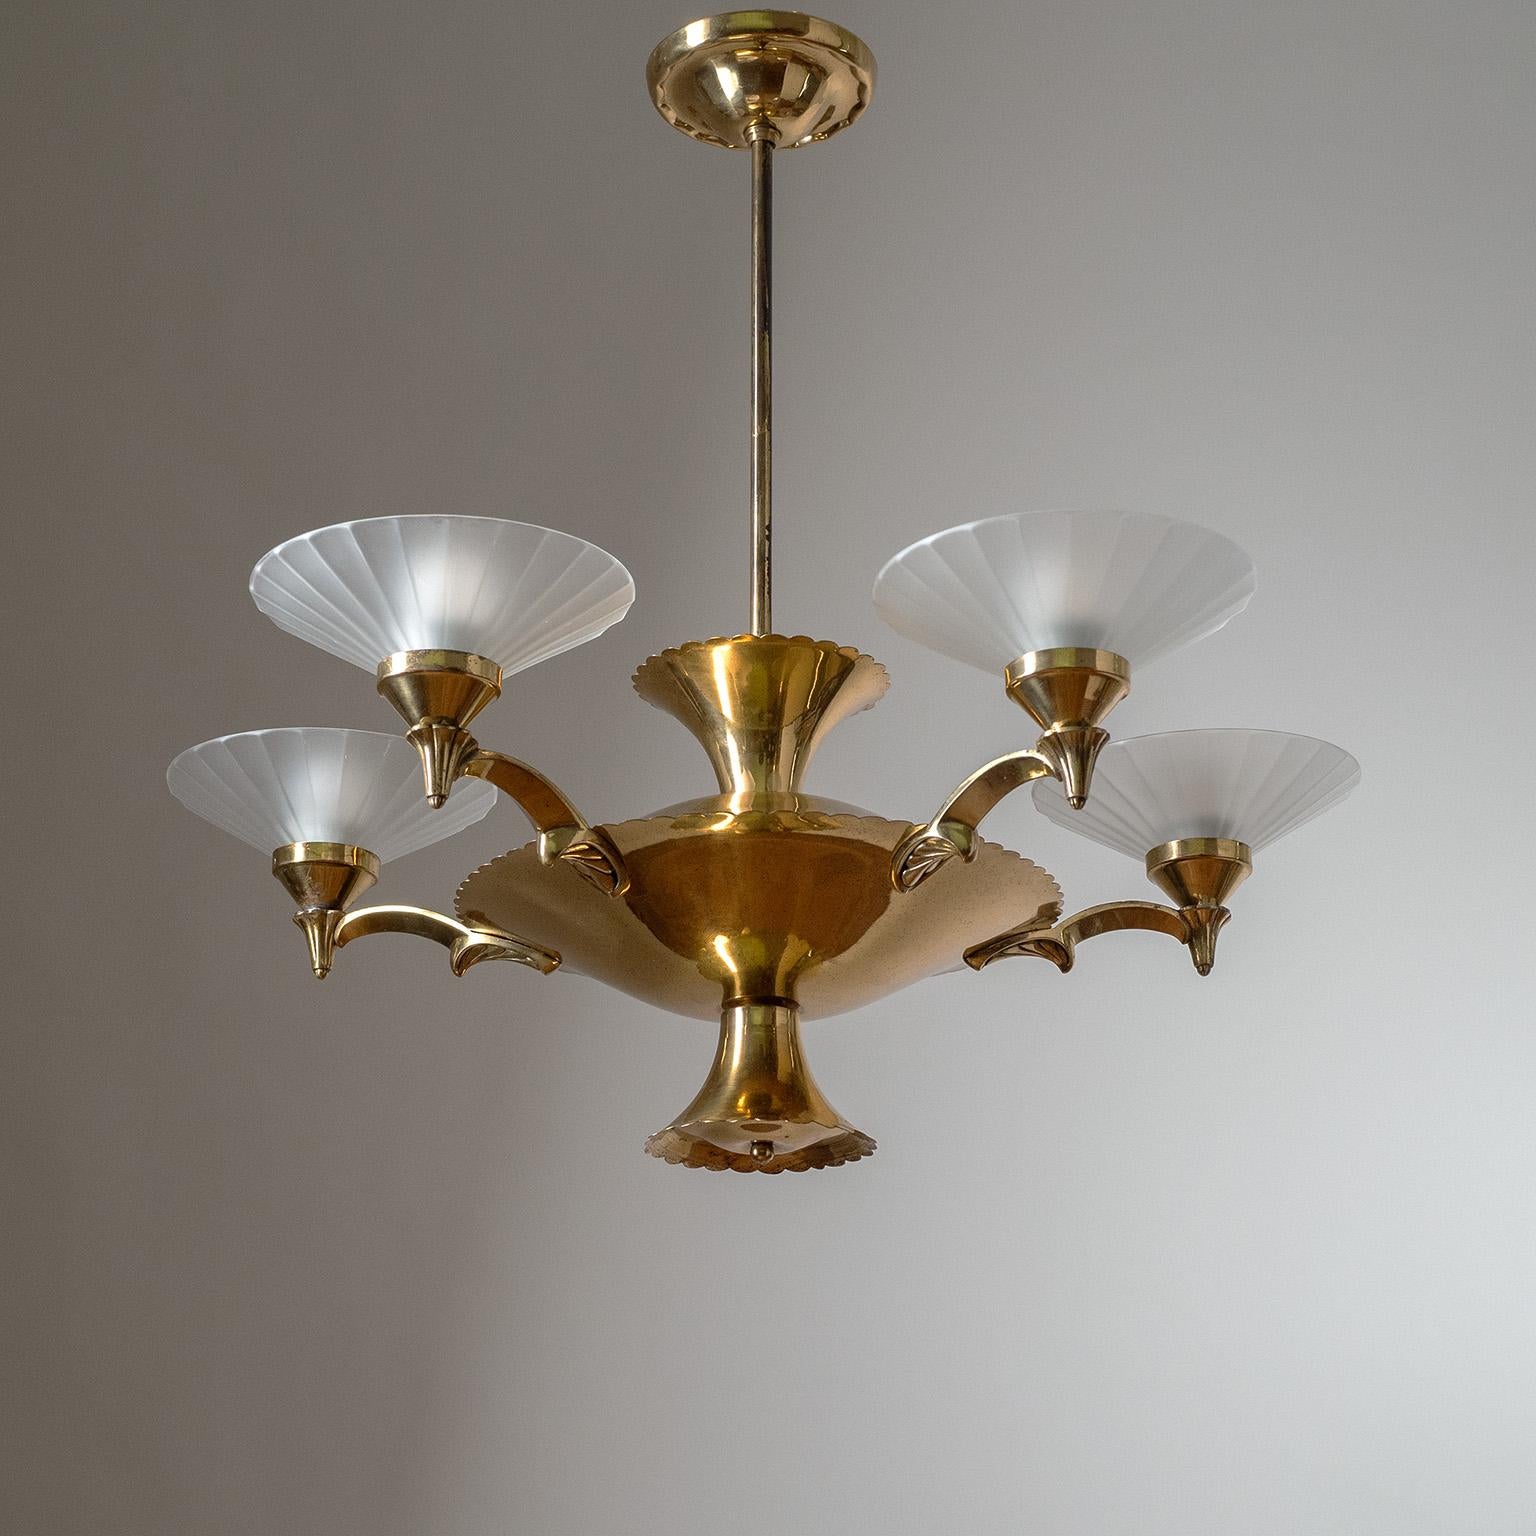 Fine Austrian brass and glass Art Deco chandelier from the 1930-1940s. Five cast-brass arms with satin glass diffusers are attached to a large brass disc-shaped body with scalloped edges and details. Very good overall condition with minor patina on